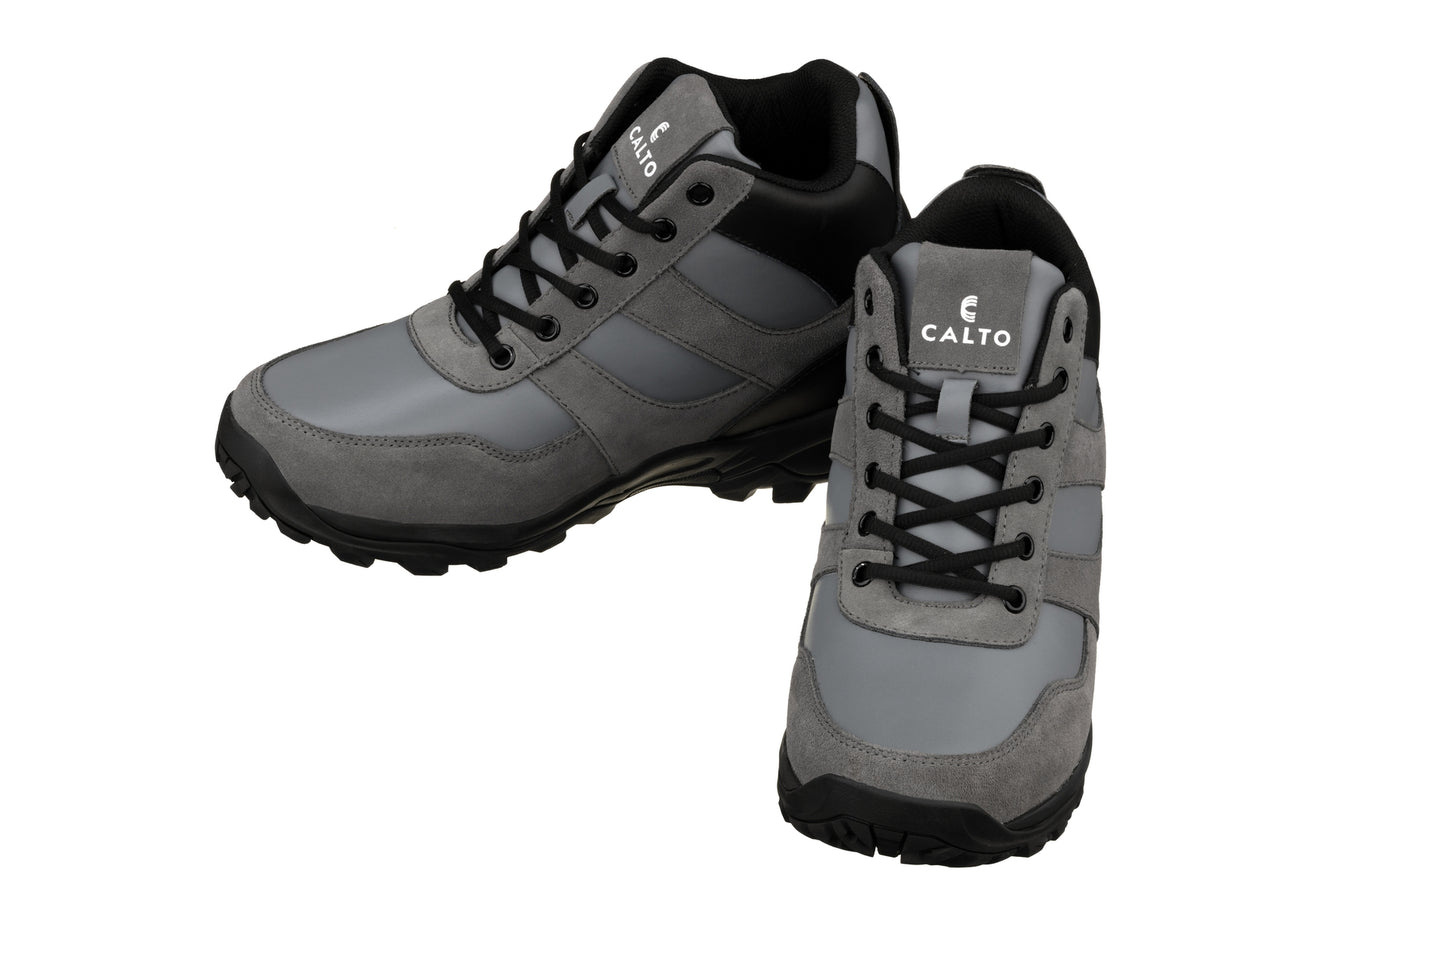 Elevator shoes height increase CALTO - S33511 - 3.6 Inches Taller (Grey/Black) - Hiker Sneakers